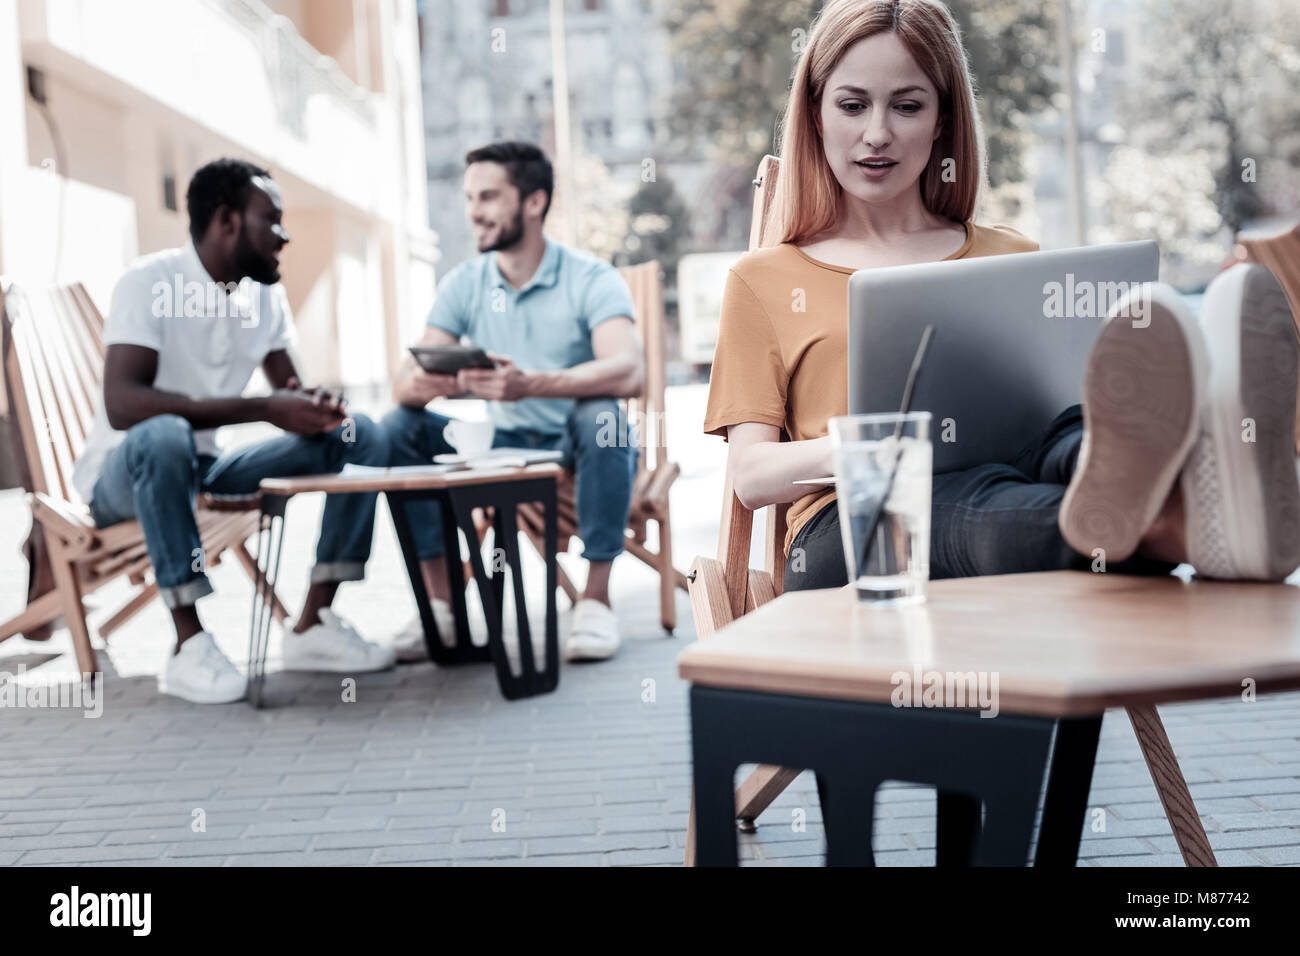 Enthusiastic young lady working on laptop outdoors Stock Photo